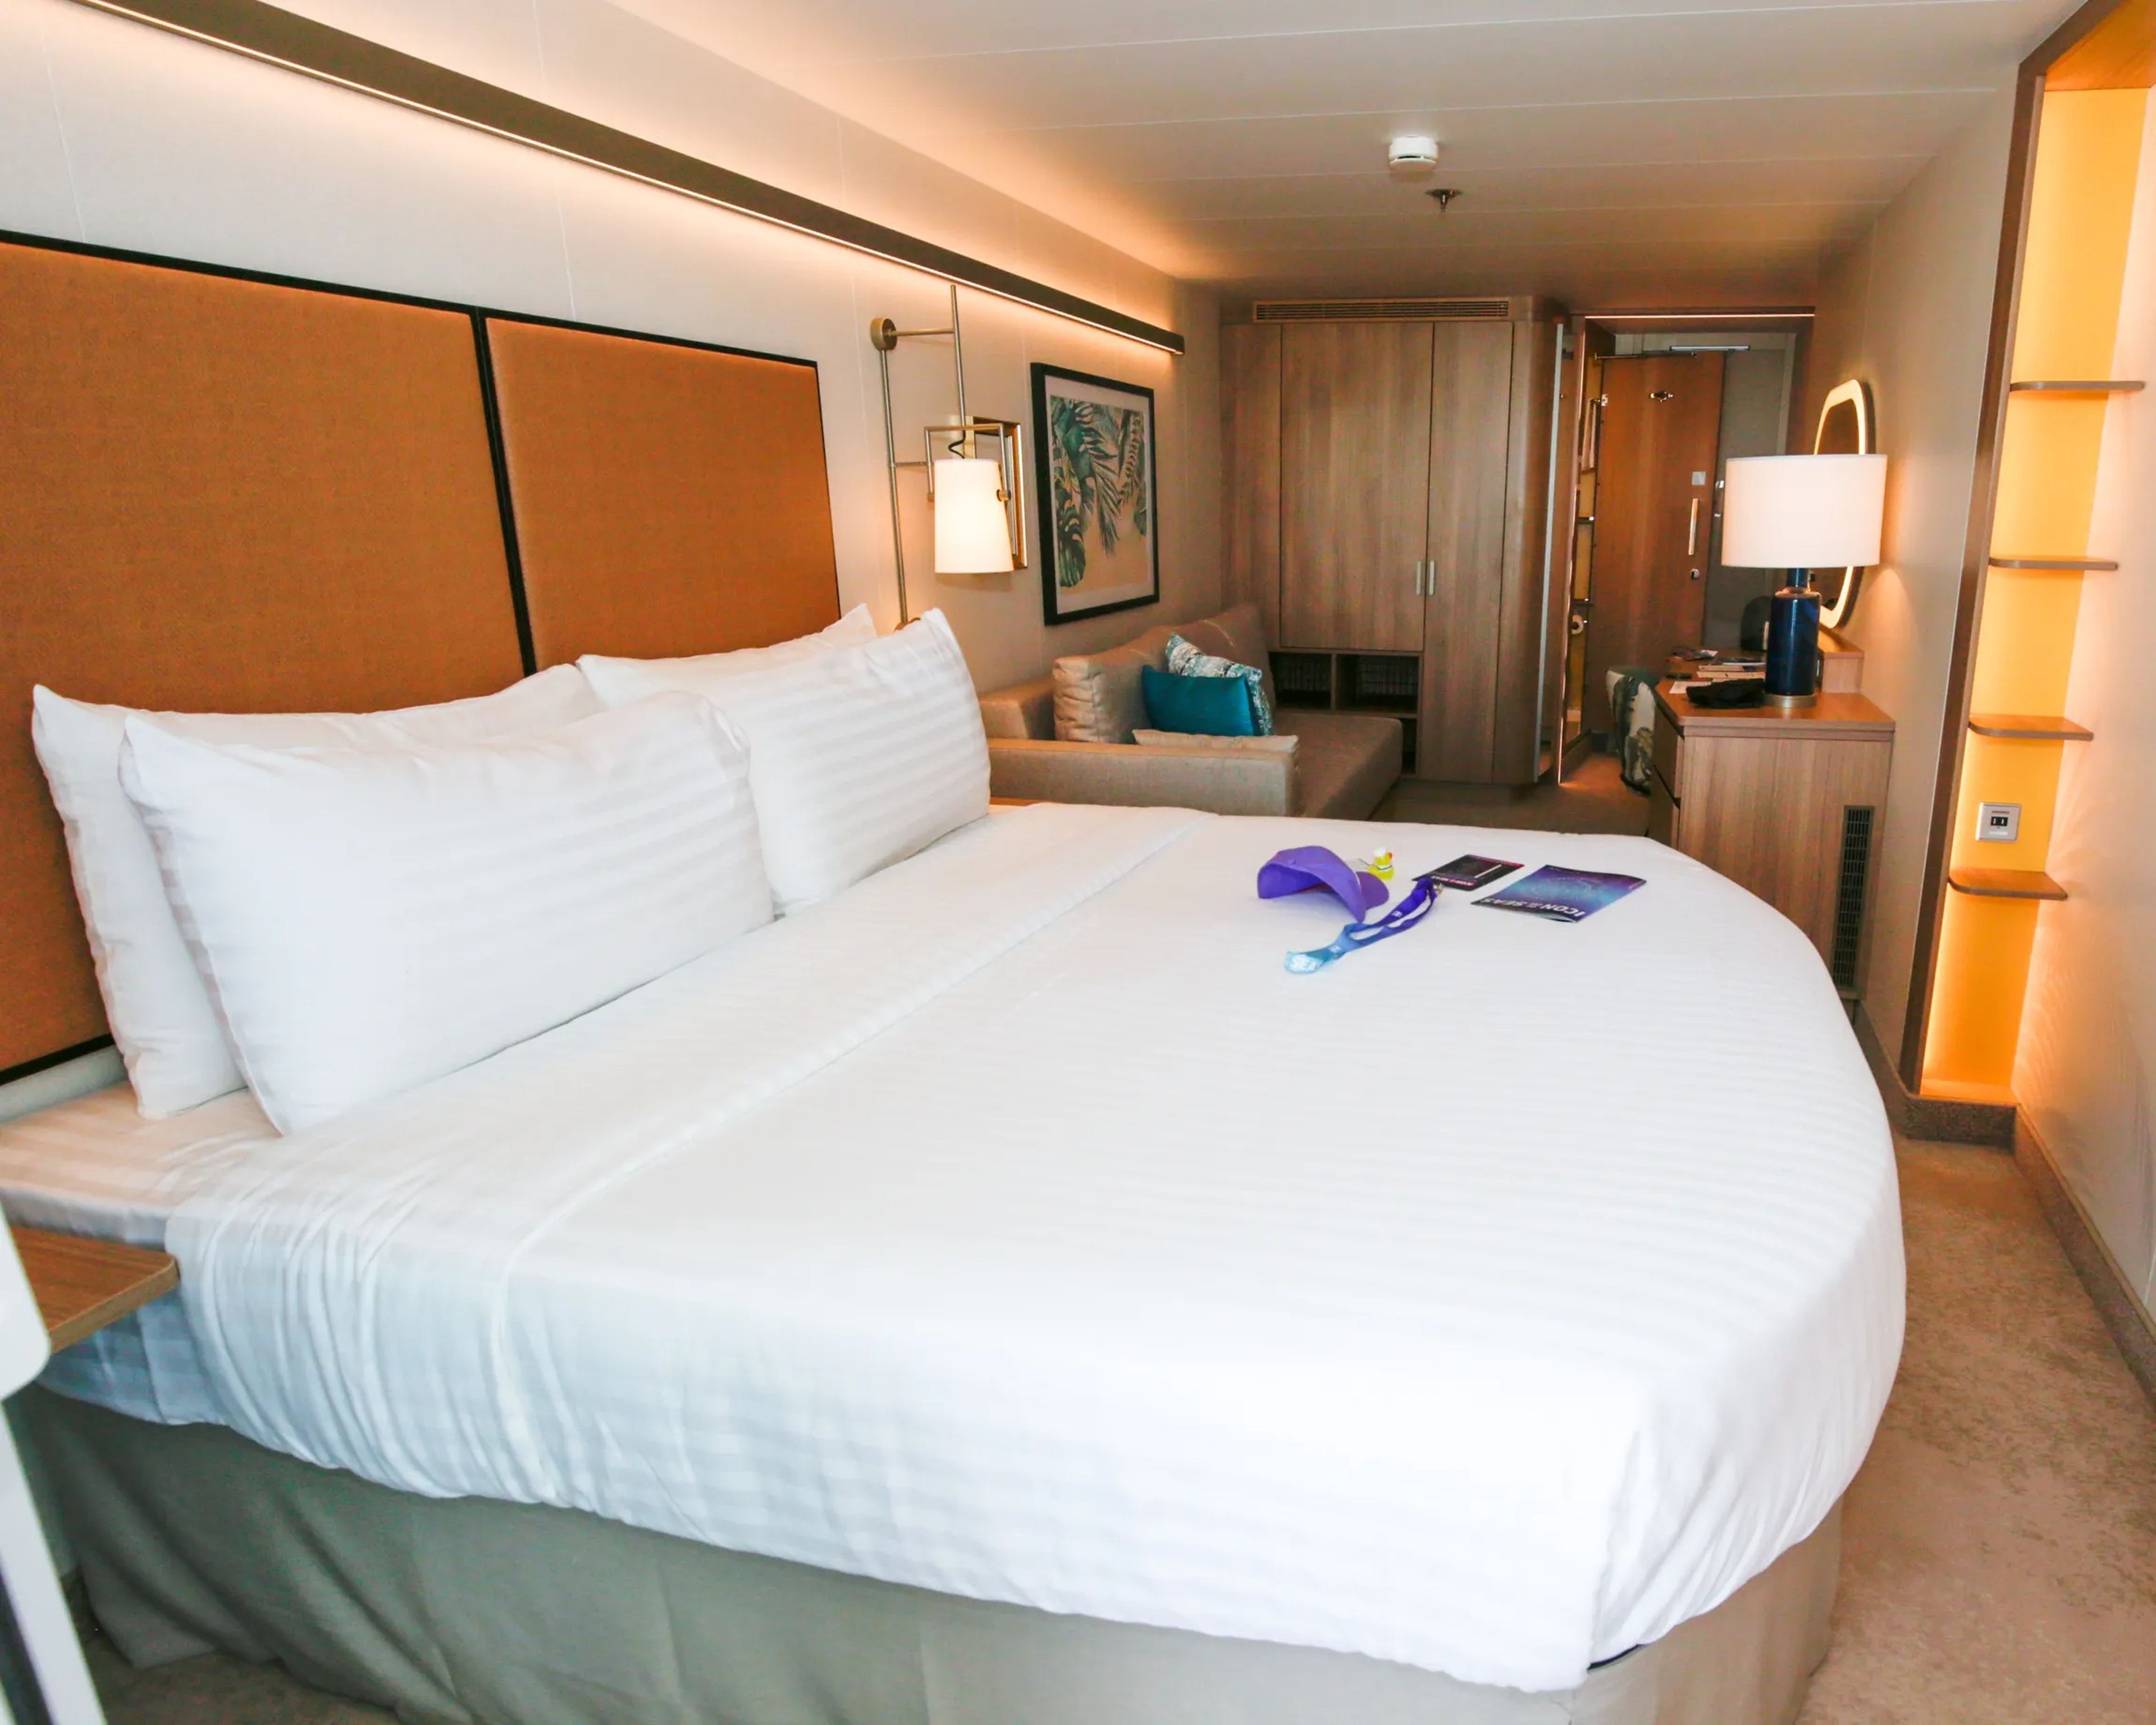 Royal Caribbean Icon of the Seas' ocean-view balcony cabin's bed and living room